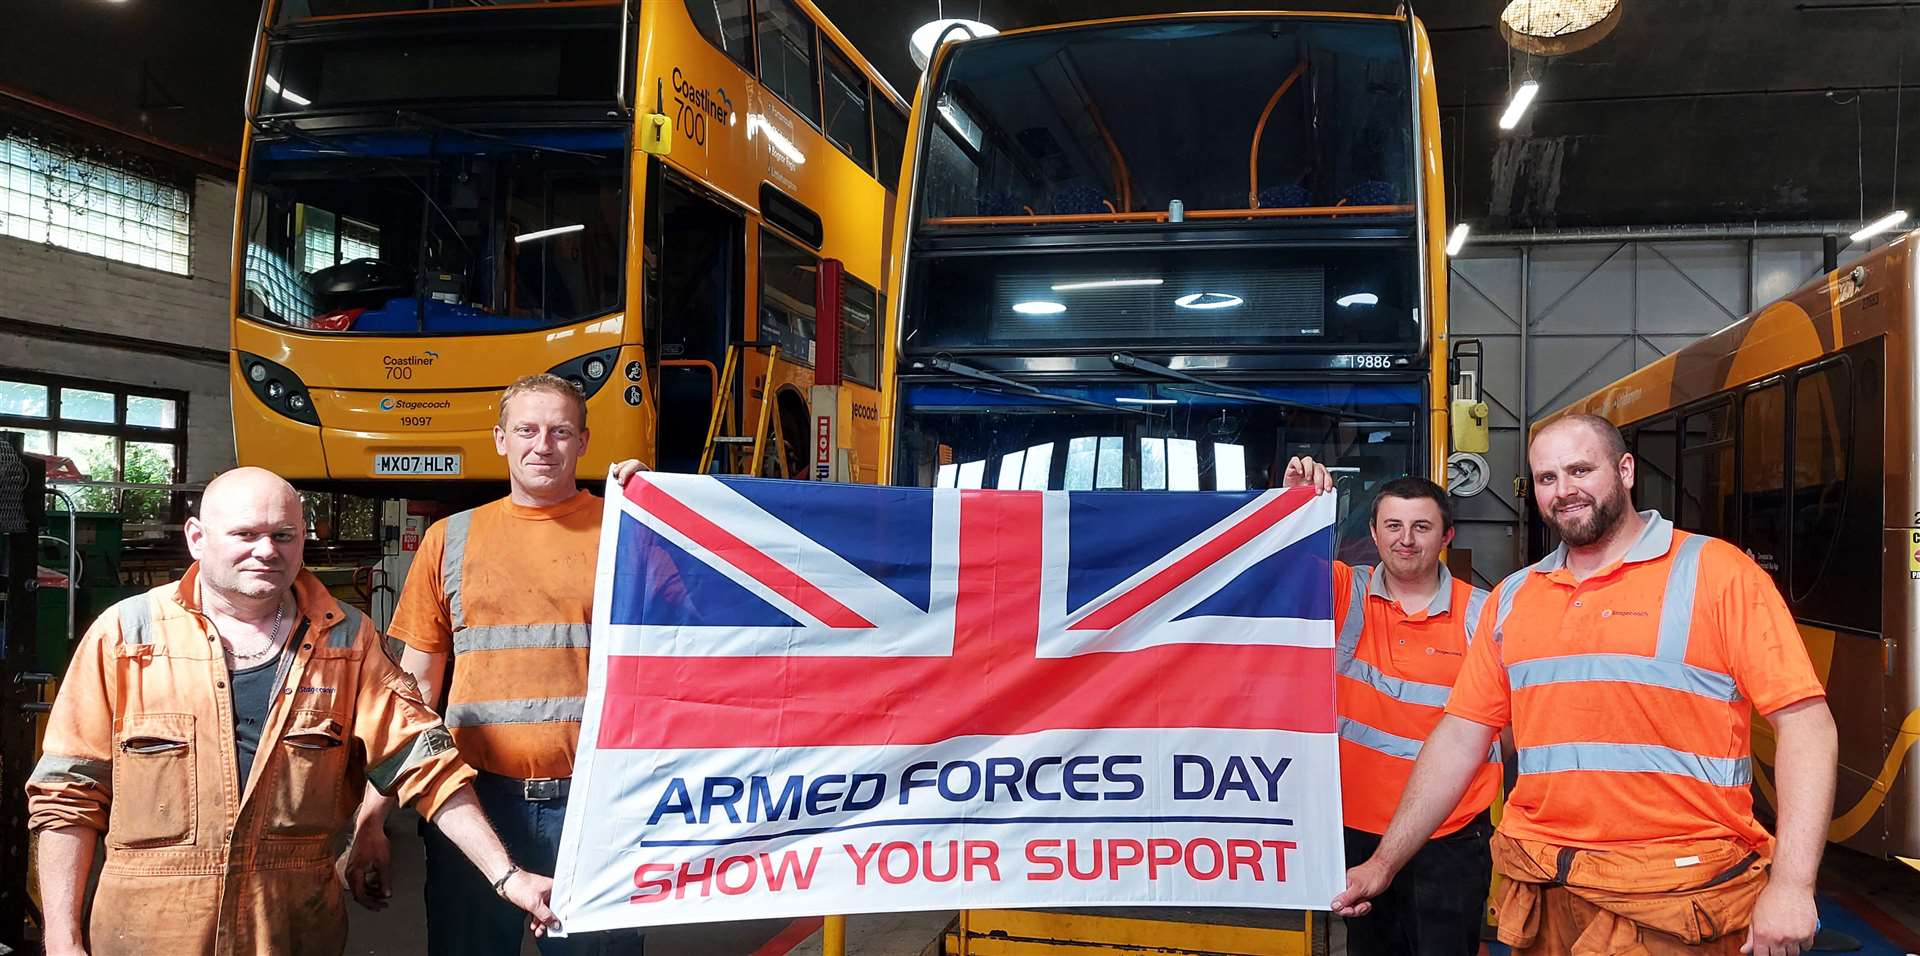 Stagecoach is offering free travel to veterans and cadets in support of Armed Forces Day.